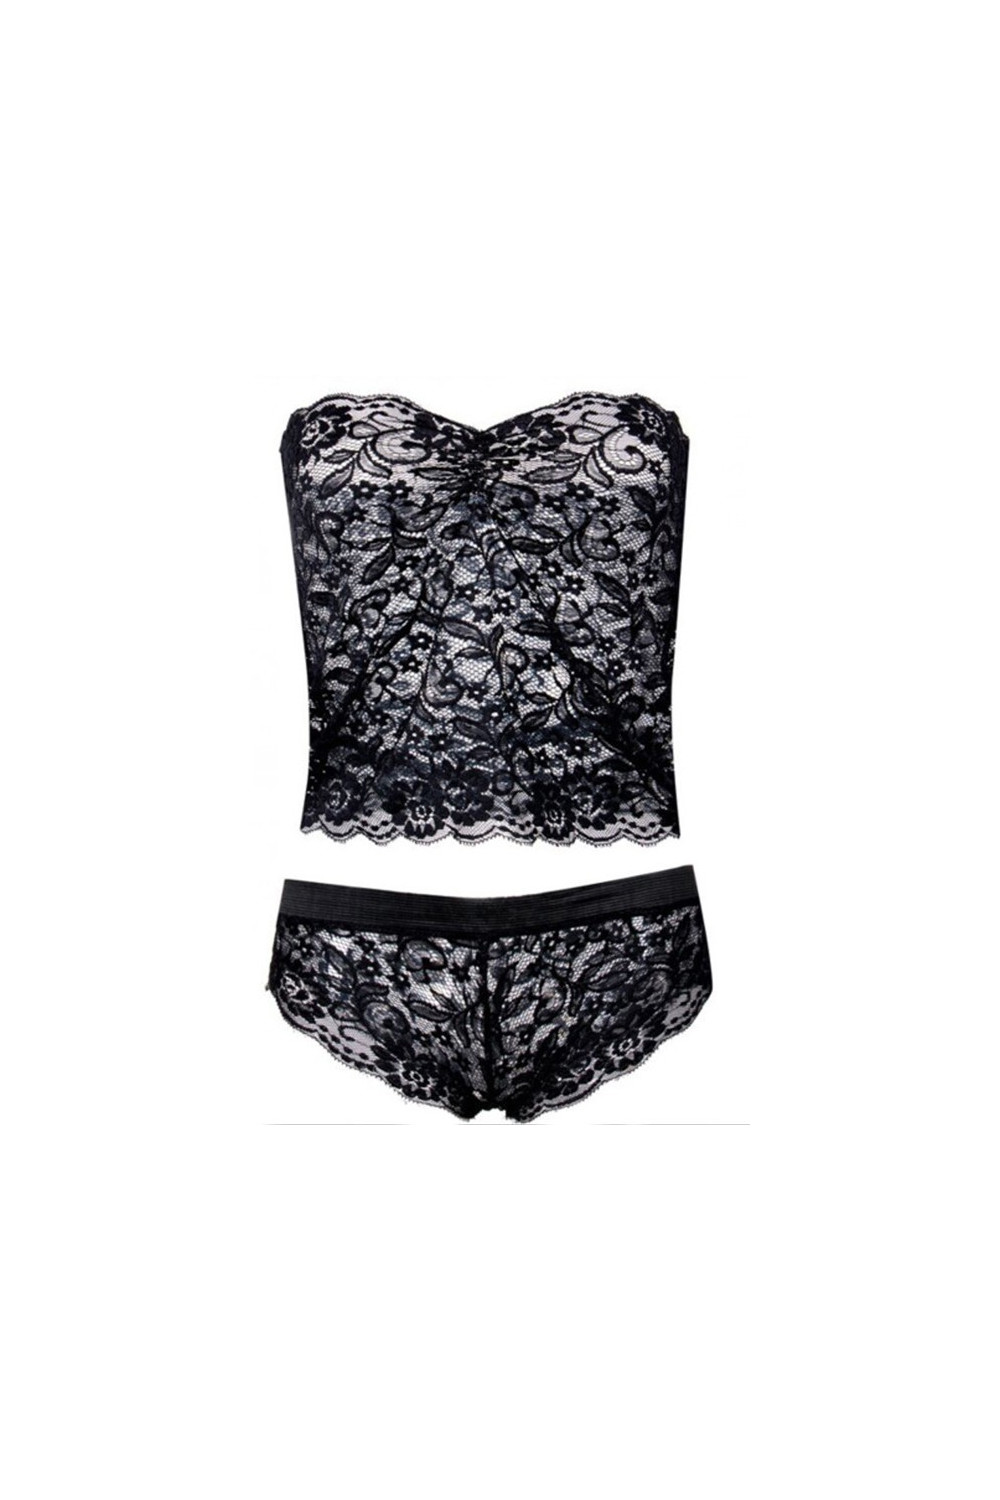 Bustier lingerie set and lace tanga